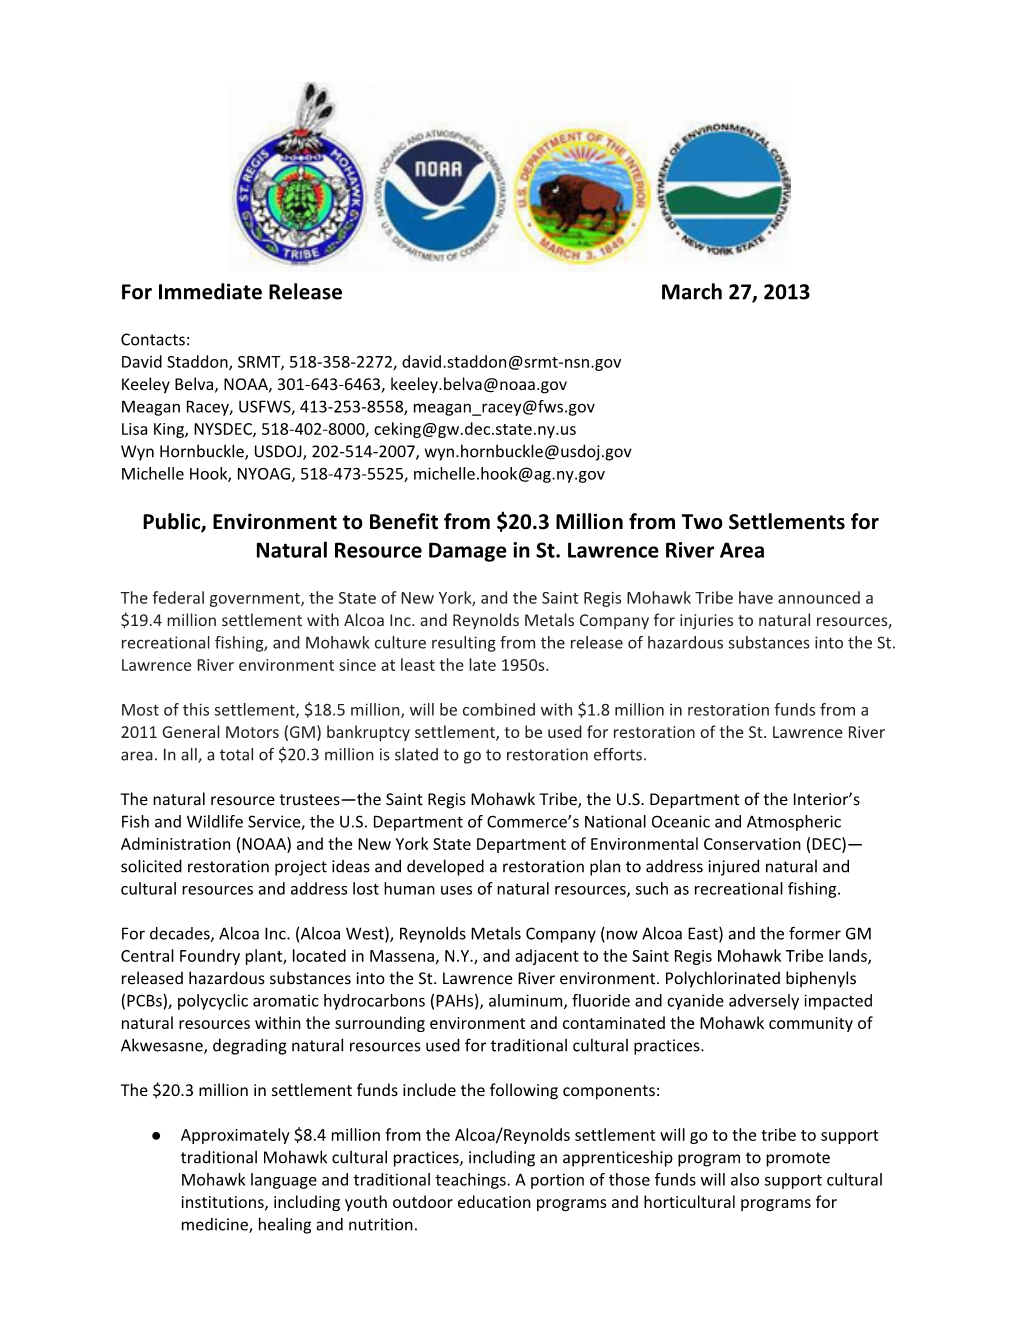 For Immediate Release March 27, 2013 Public, Environment to Benefit